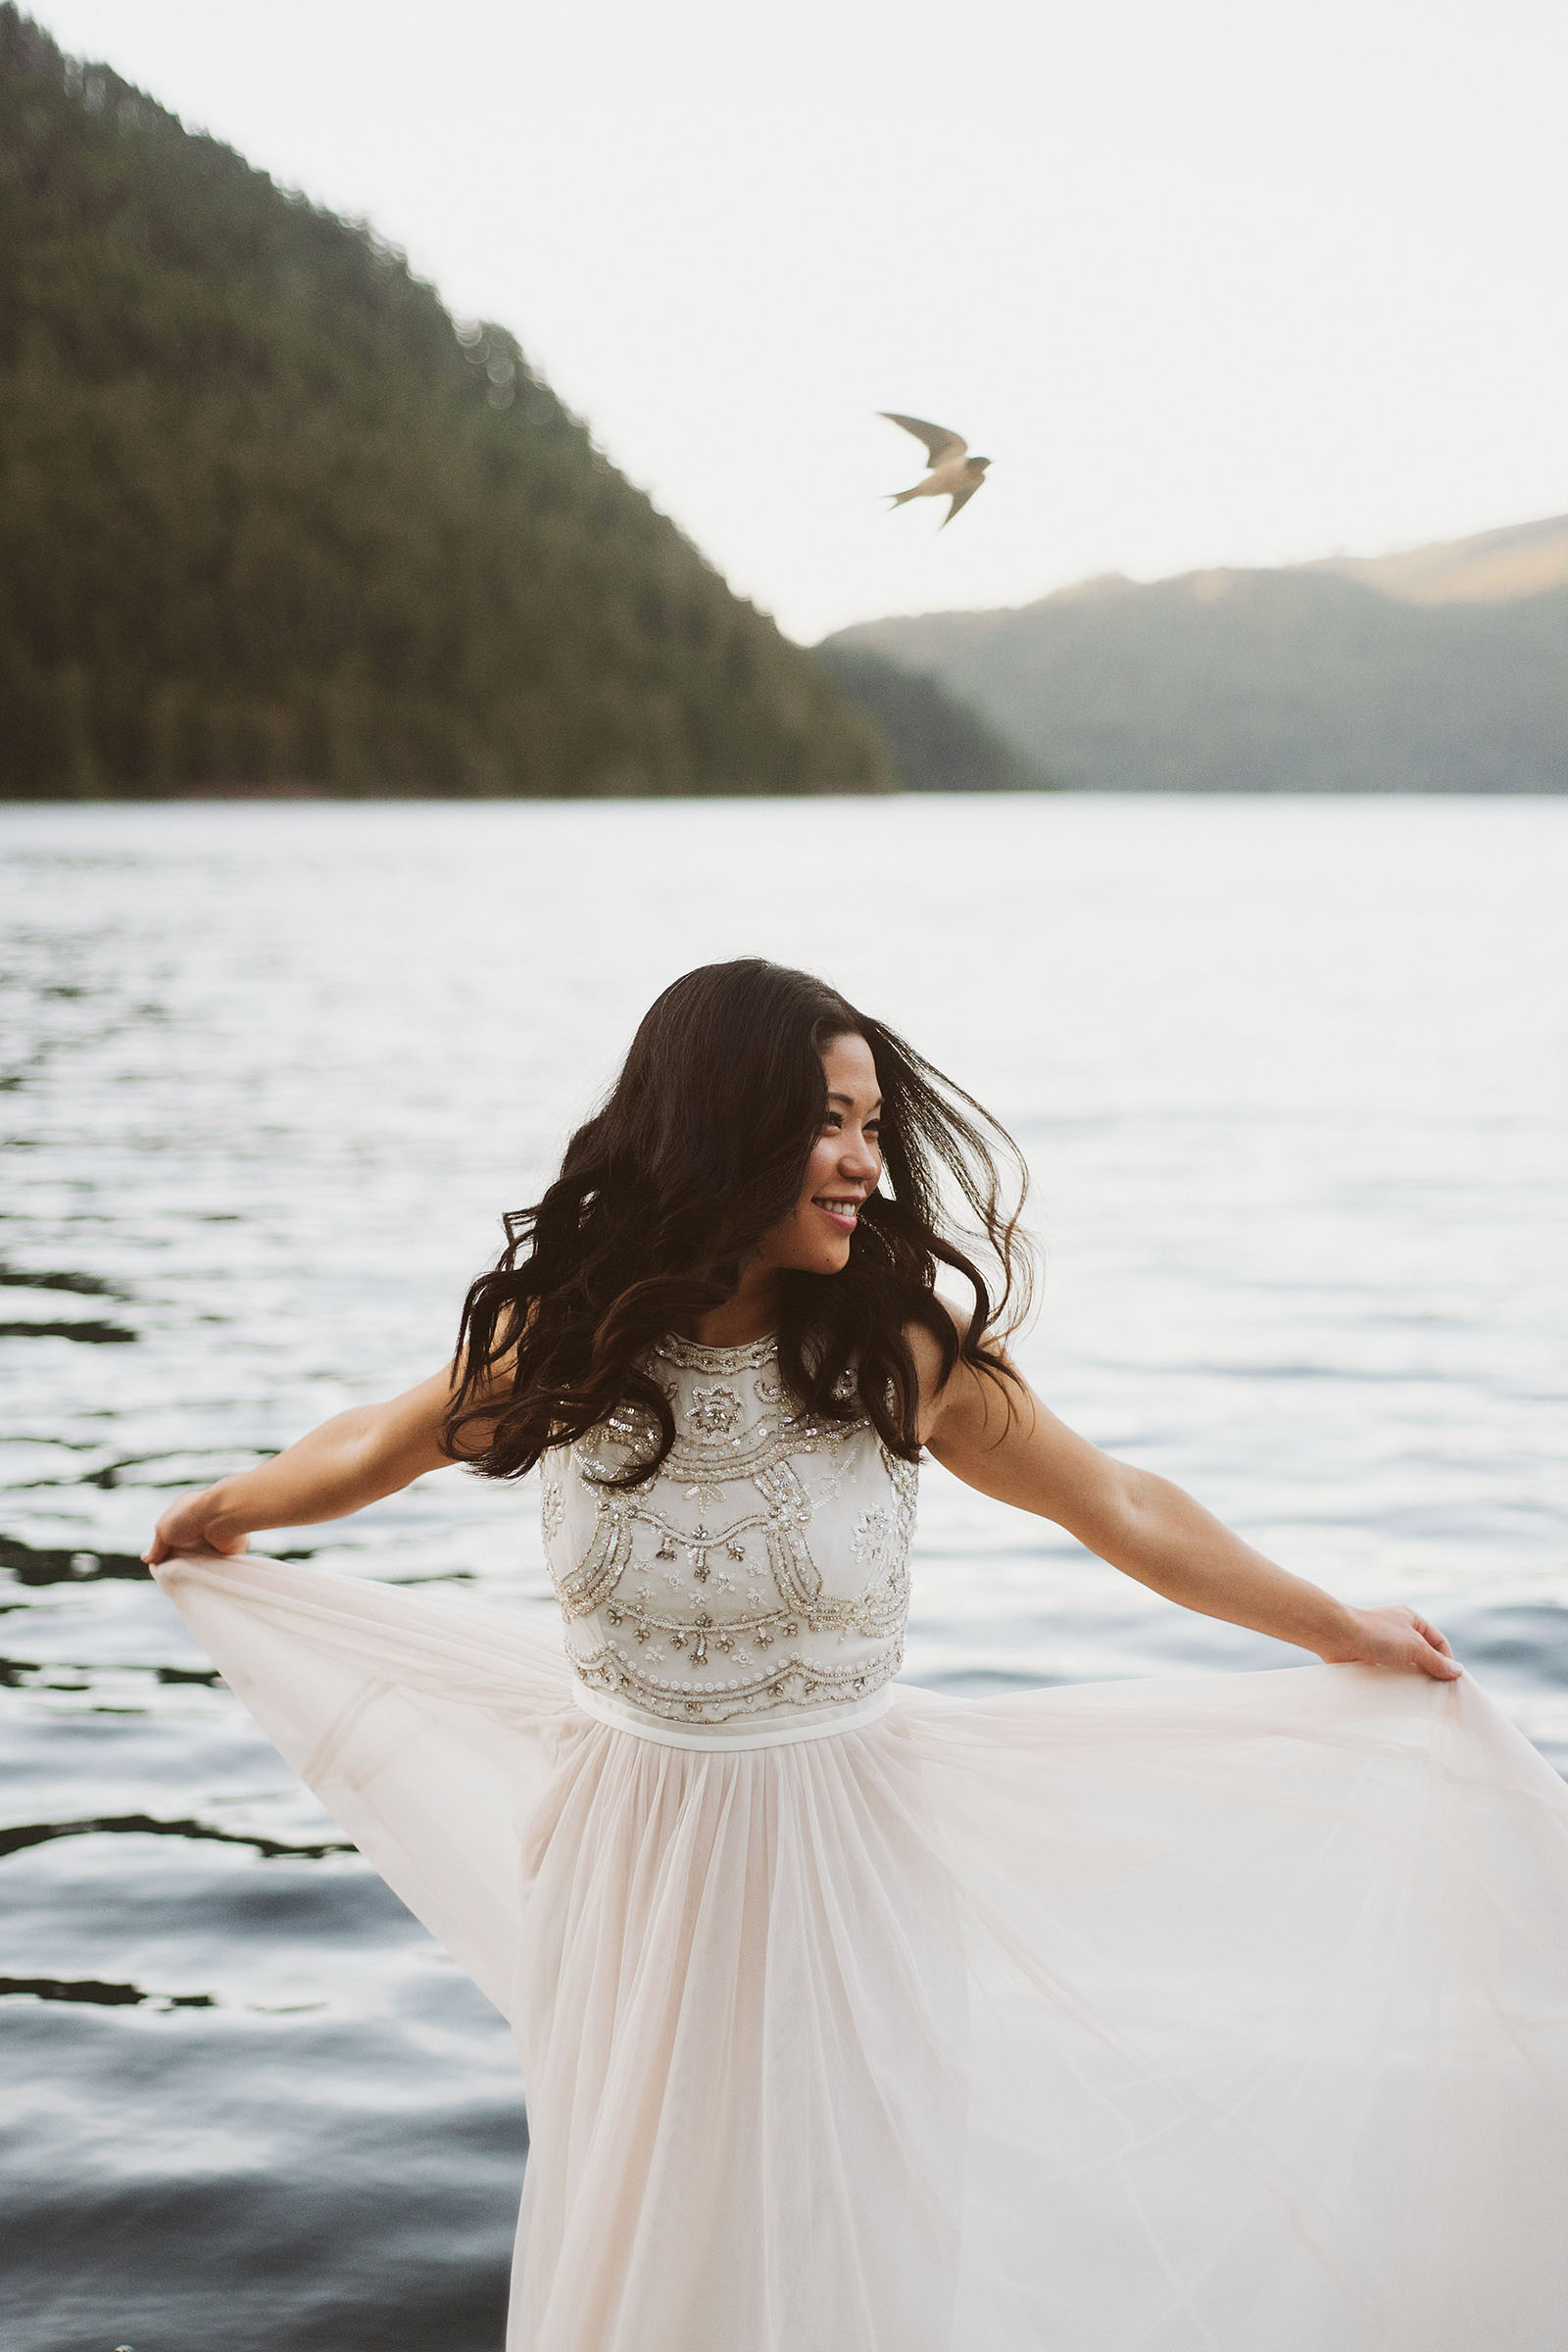 Chika & Steven's Olympic National Park Wedding at Lake Crescent